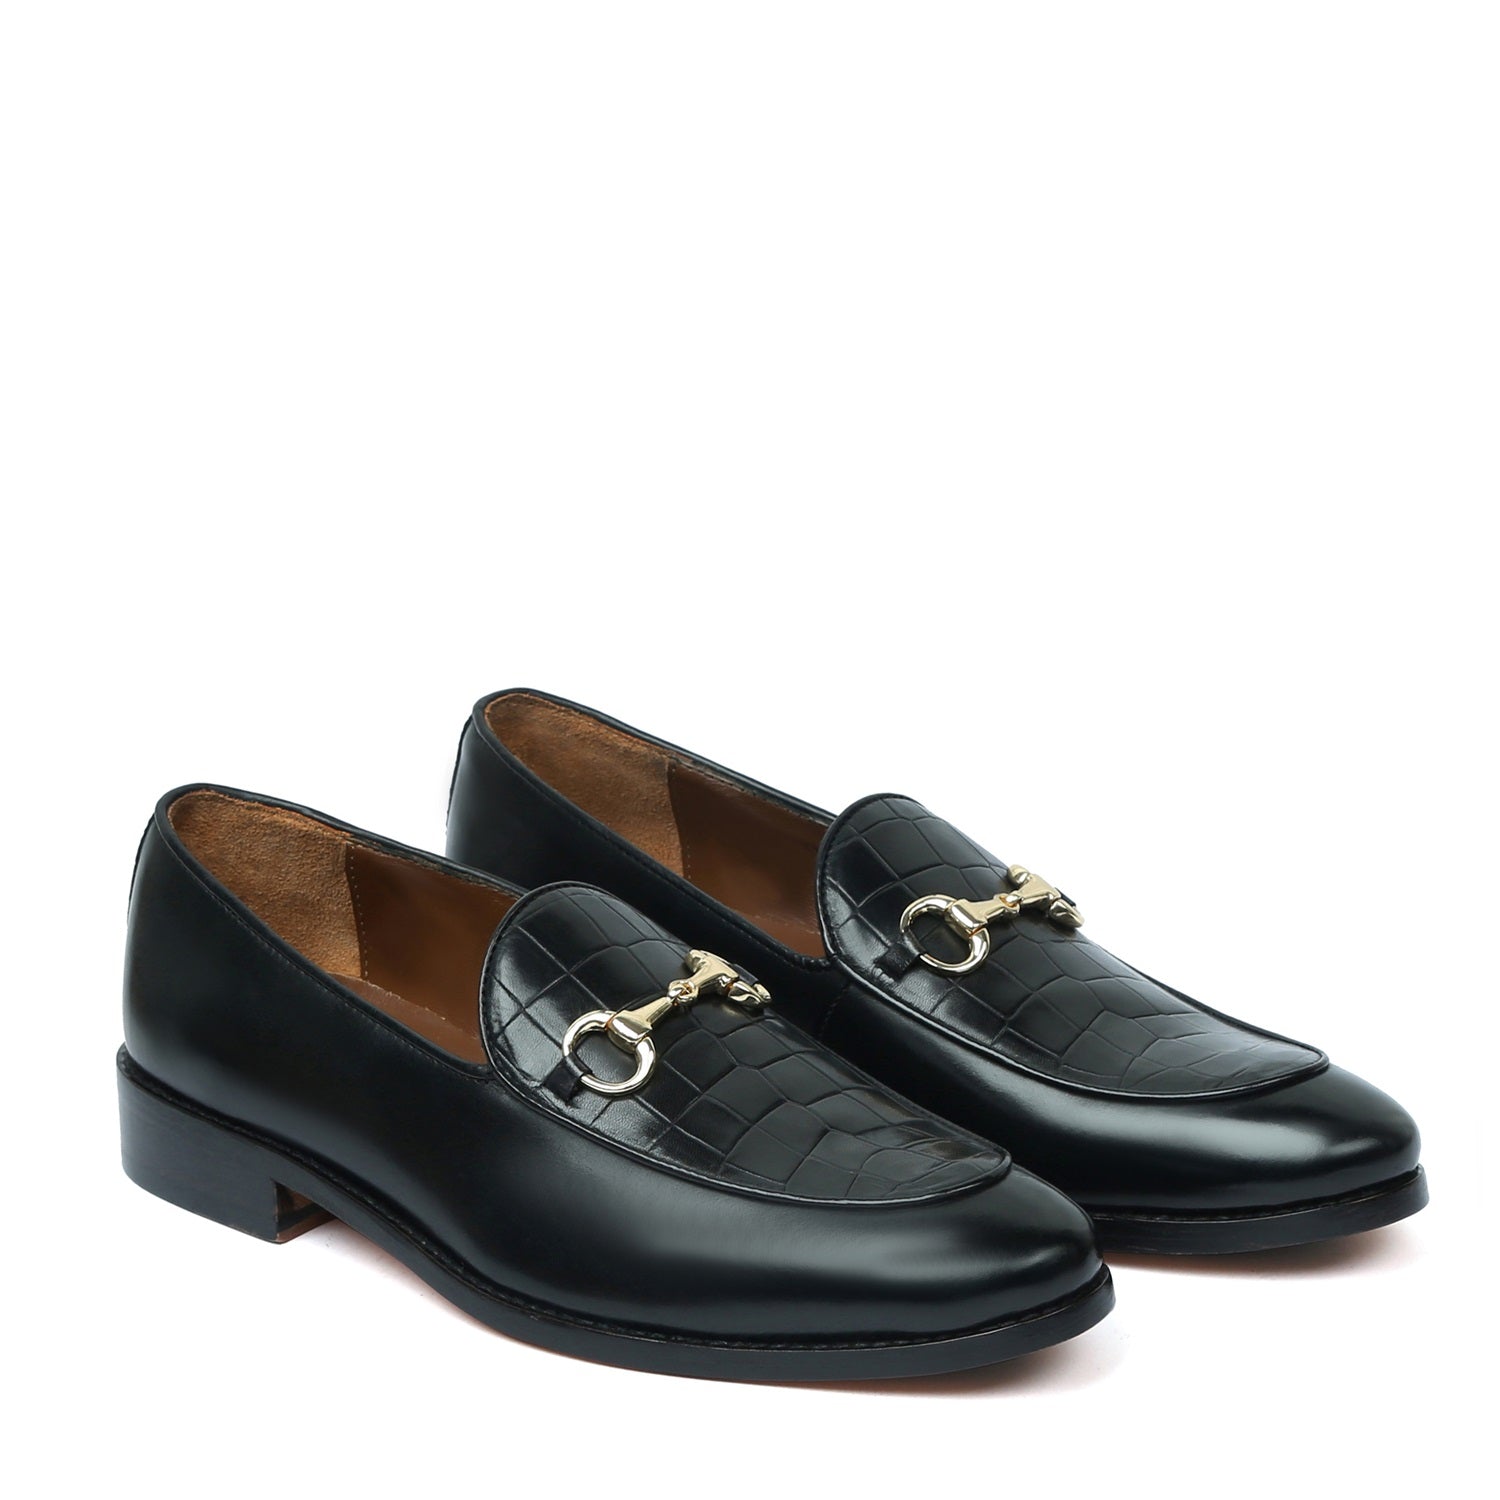 Black Horse-bit Buckle Loafers With Deep Cut Leather at Vamp